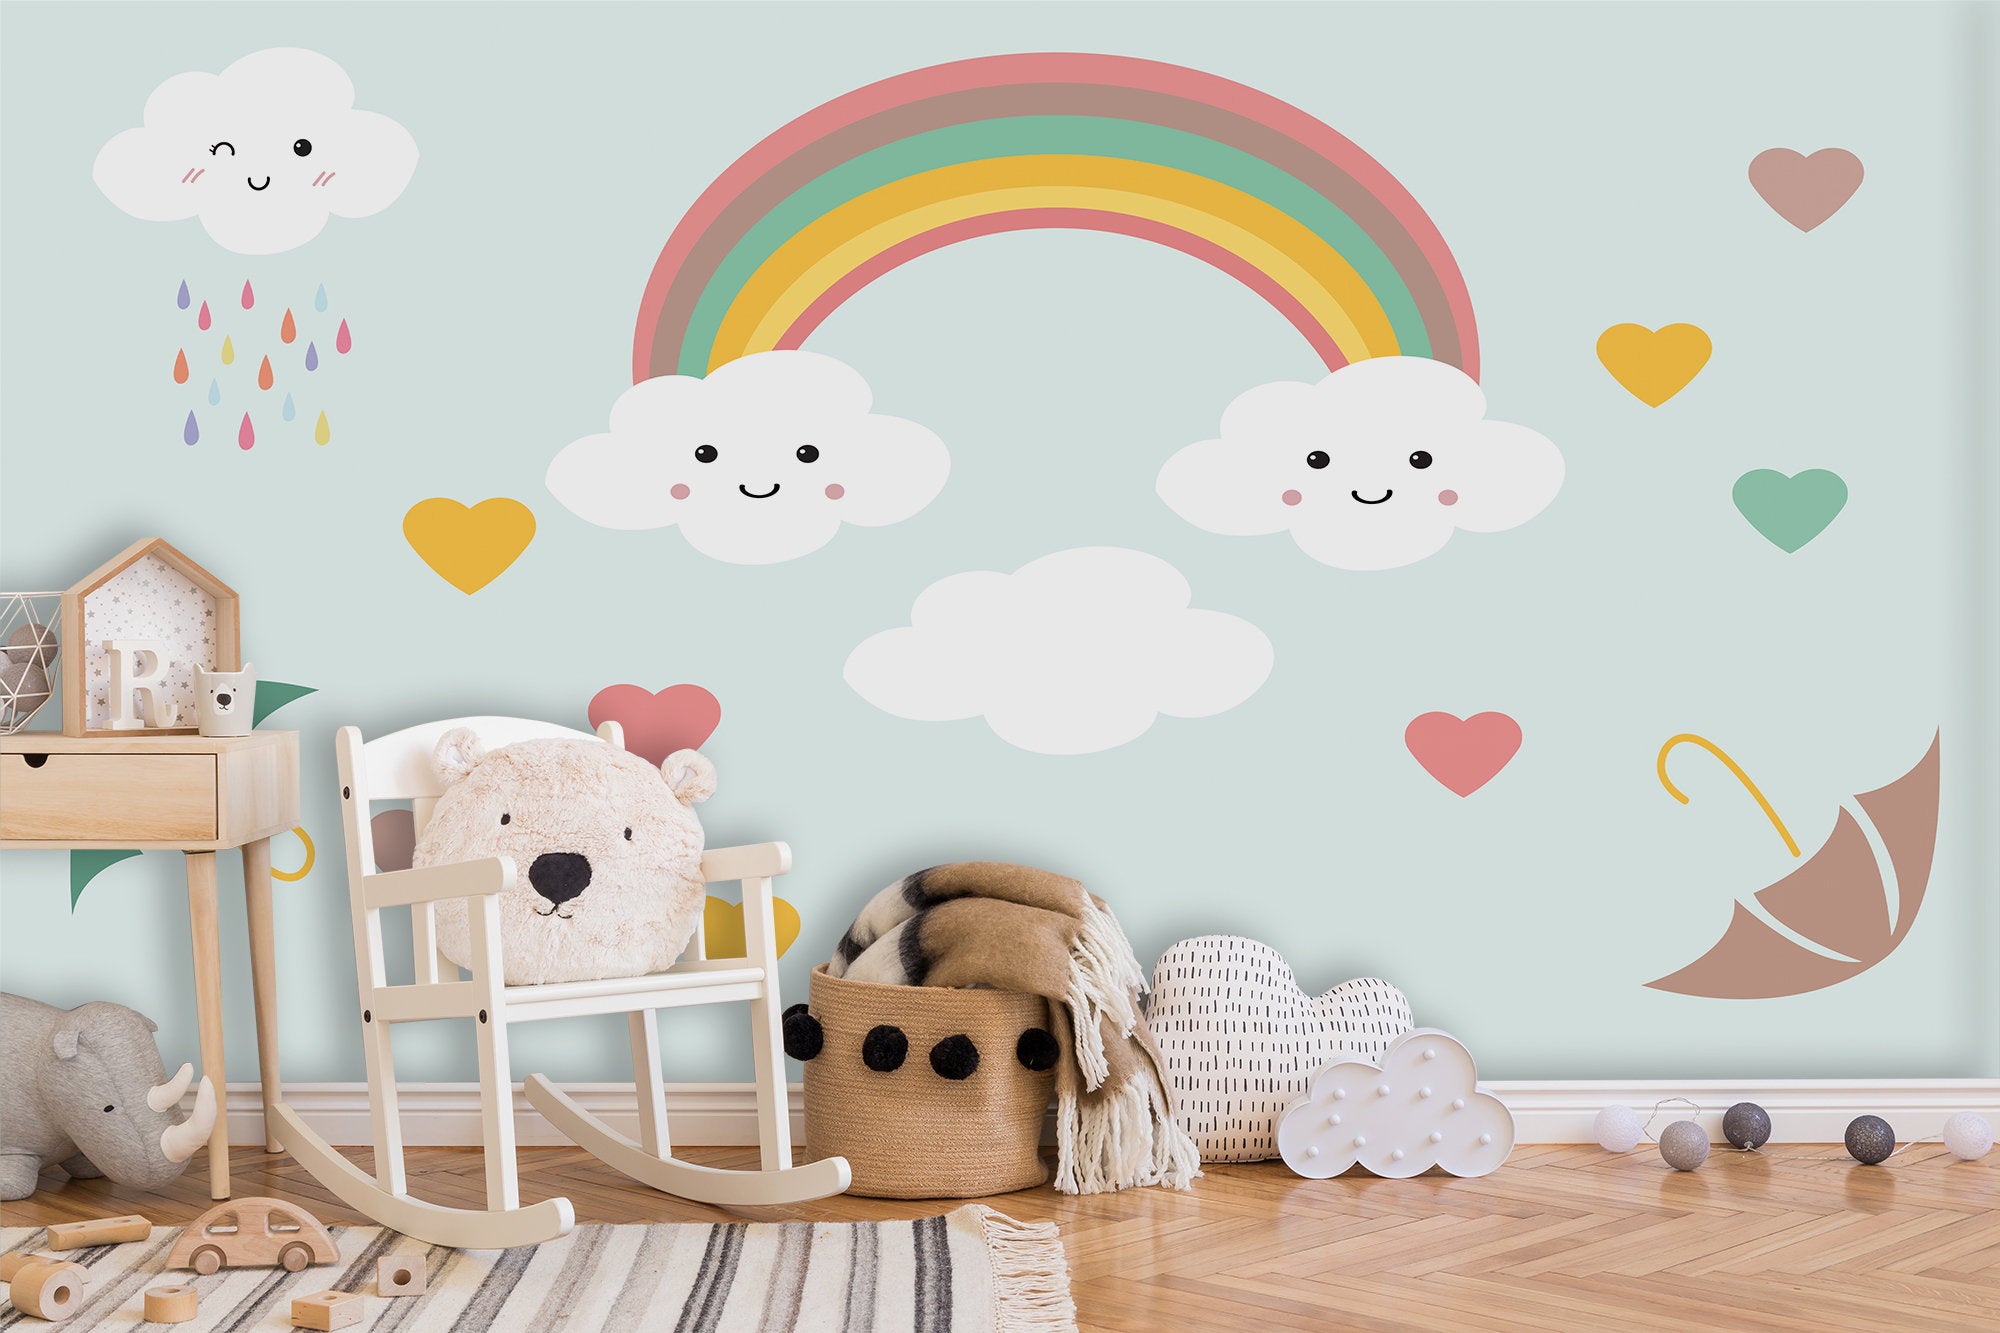 Rainbow Above Clouds Smiling Colorful Hearts Wallpaper Nursery Bedroom Children Kids Room Mural Home Decor Wall Art Removable